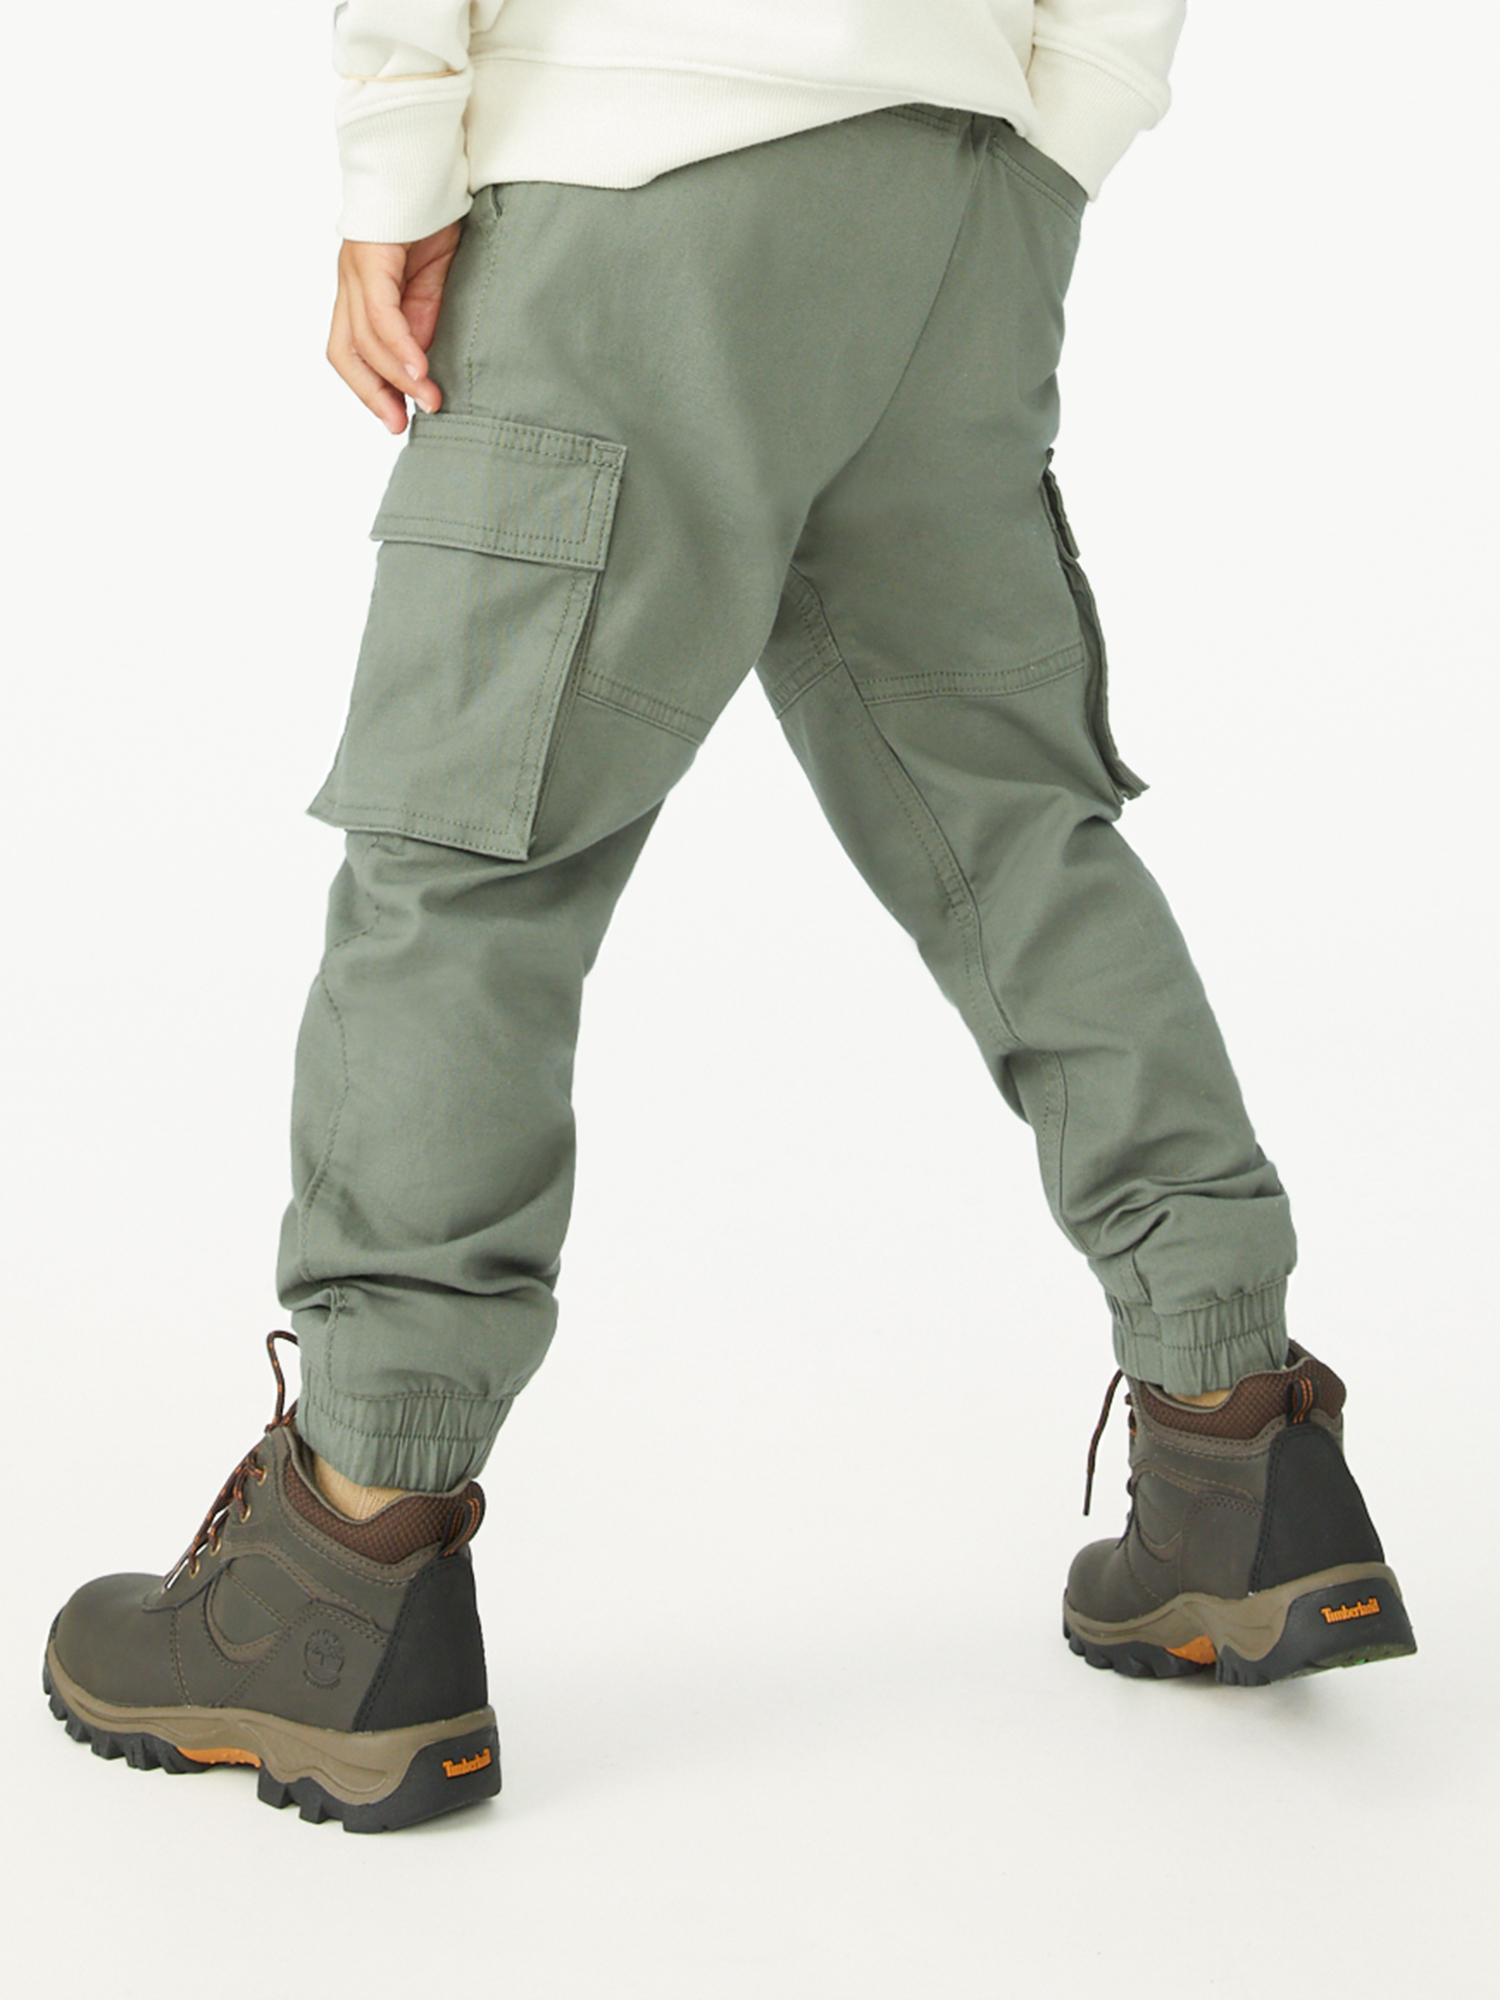 Free Assembly Boys Stretch Cargo Jogger Sweatpants, 2 Pack, Sizes 4-18 - image 3 of 6